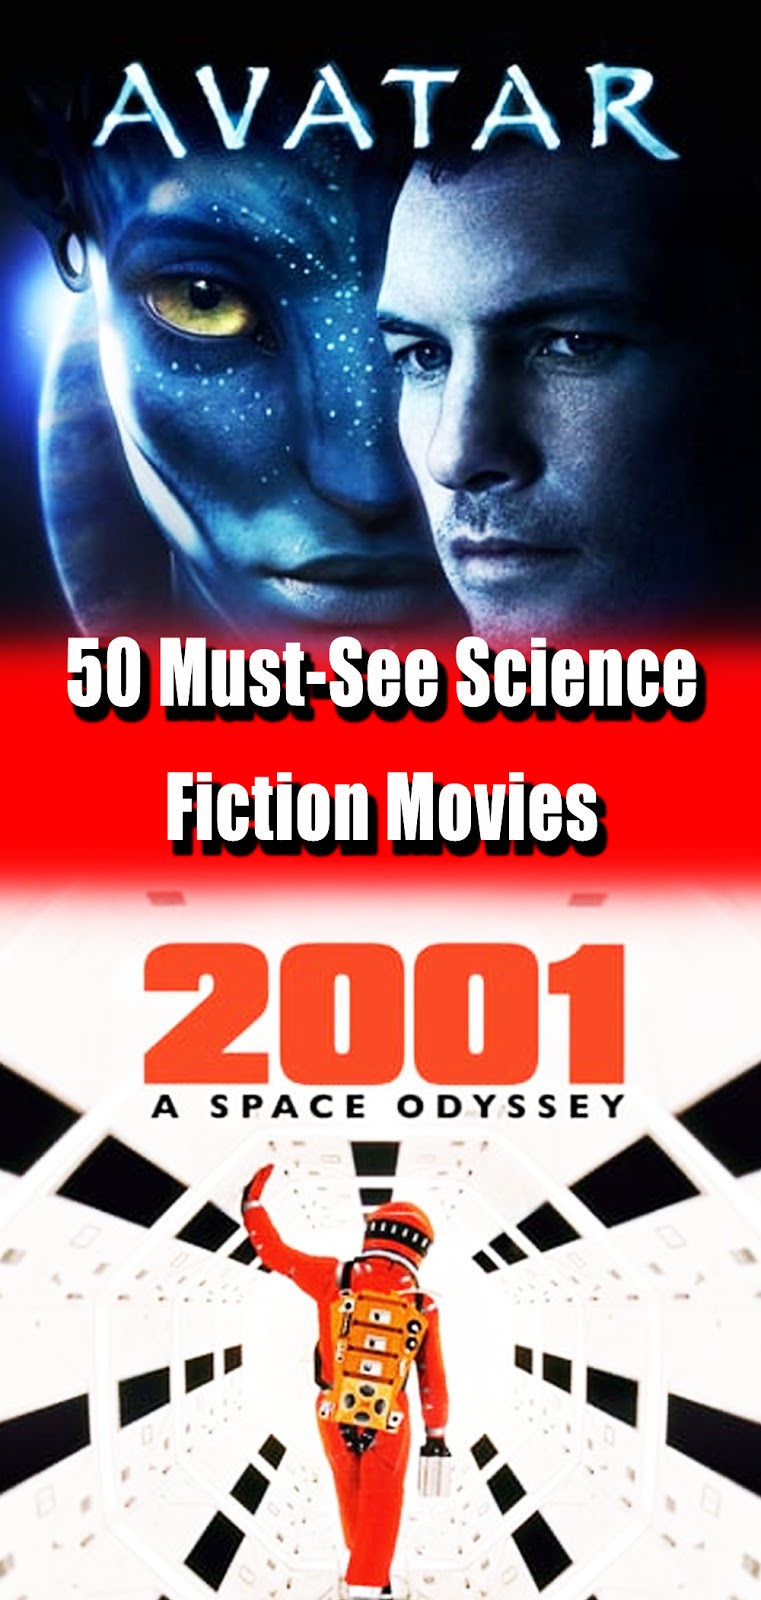 essay on science fiction movies